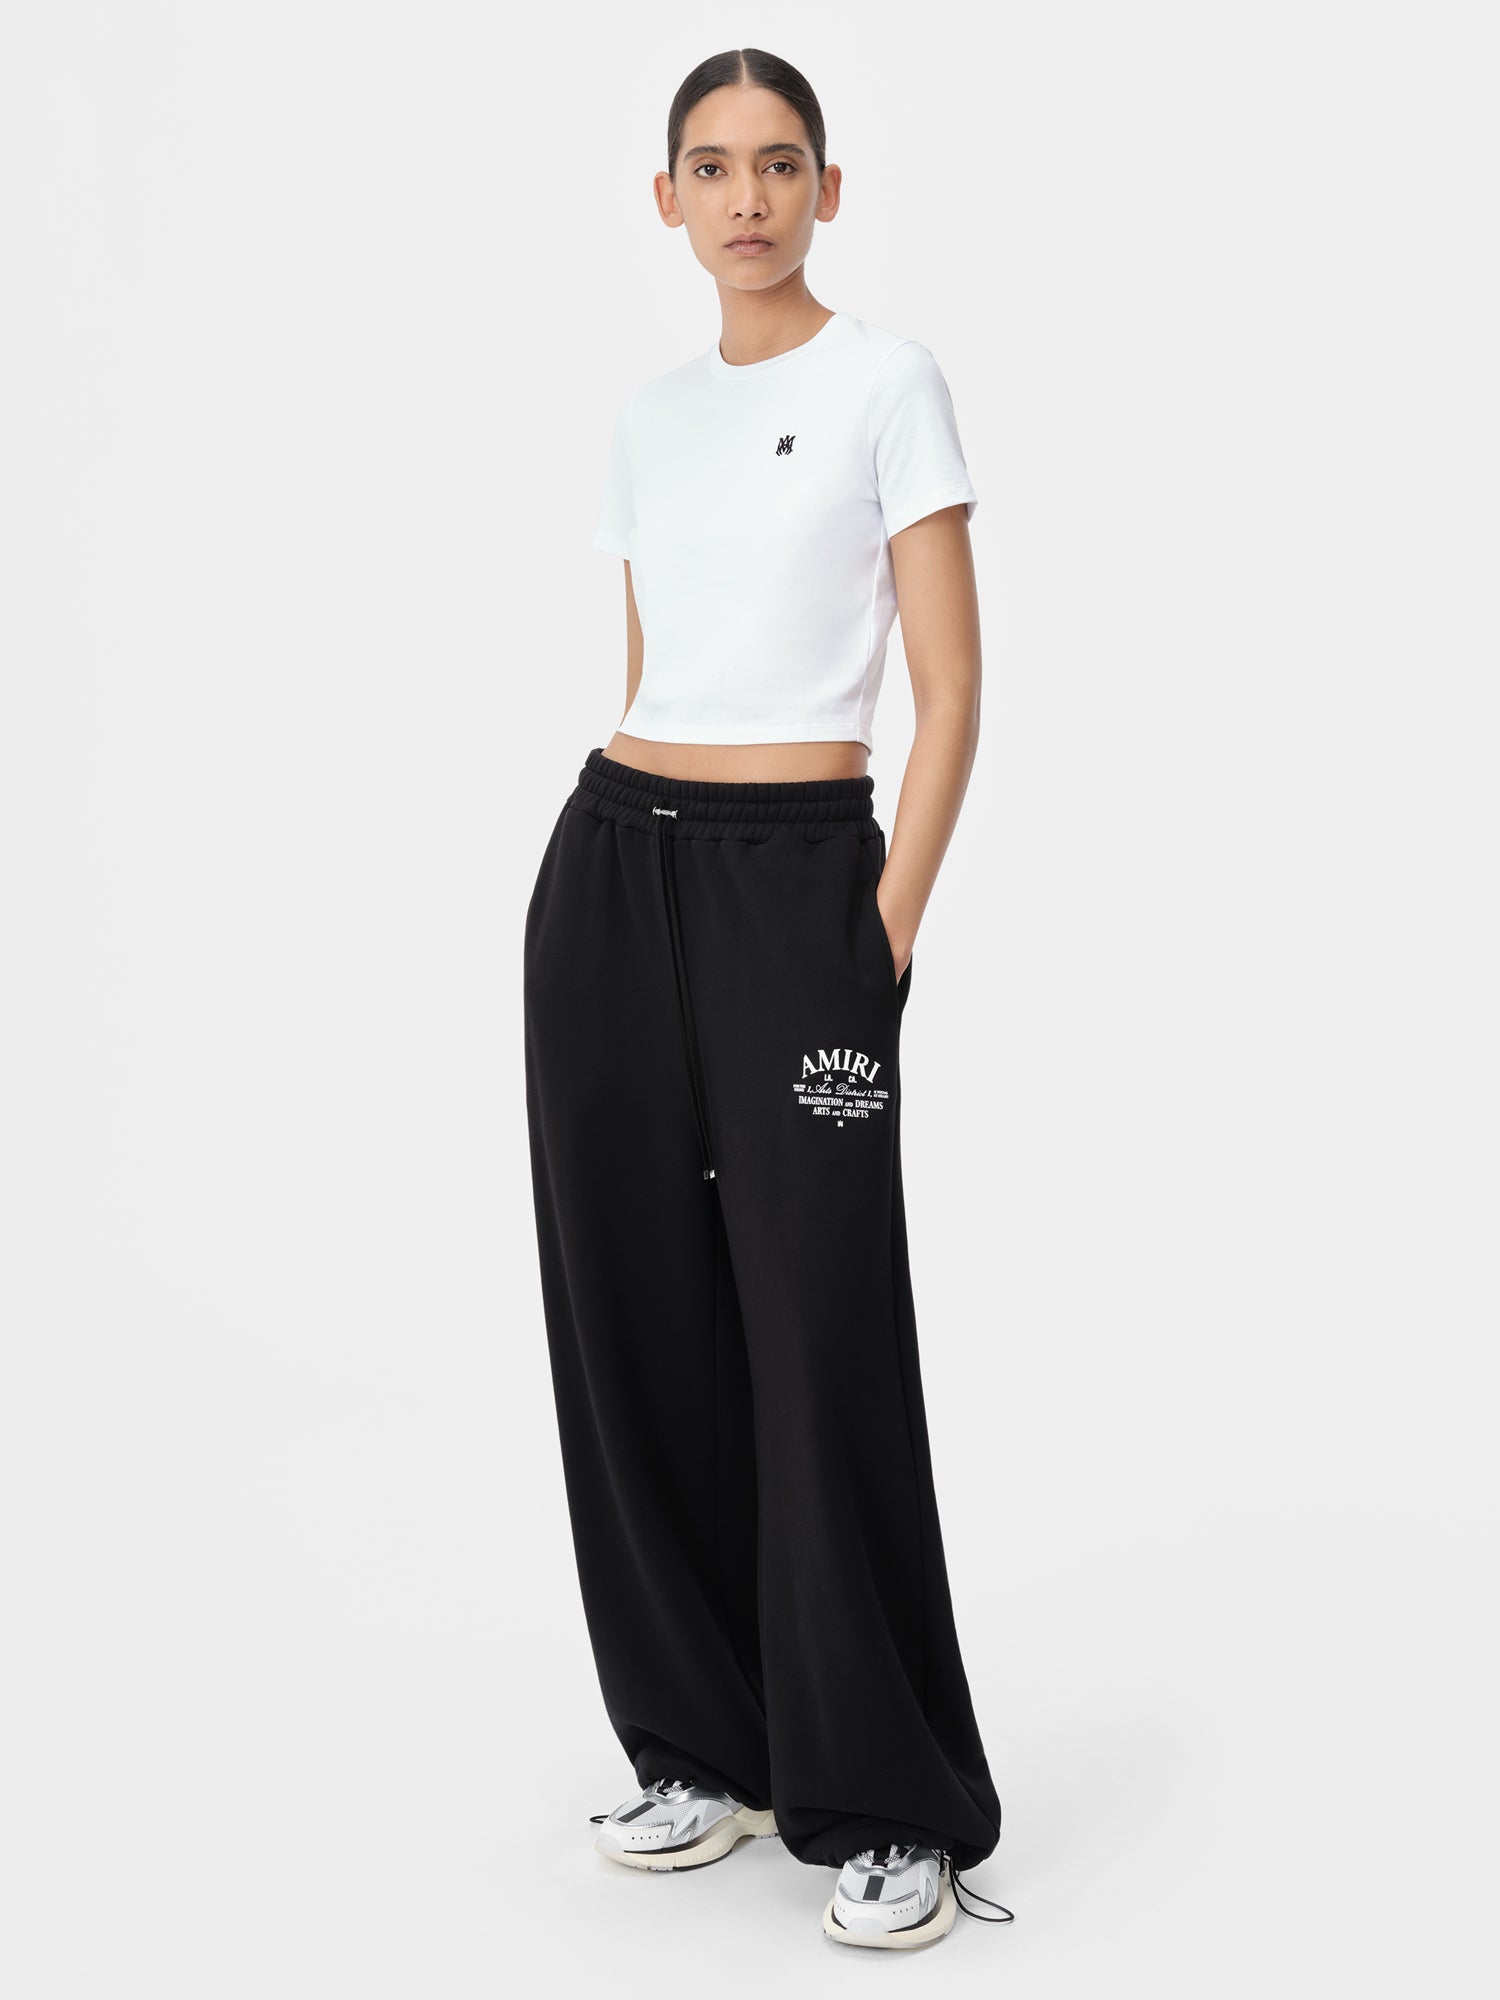 Product WOMEN - ARTS DISTRICT FLARE SWEATPANT - Black featured image